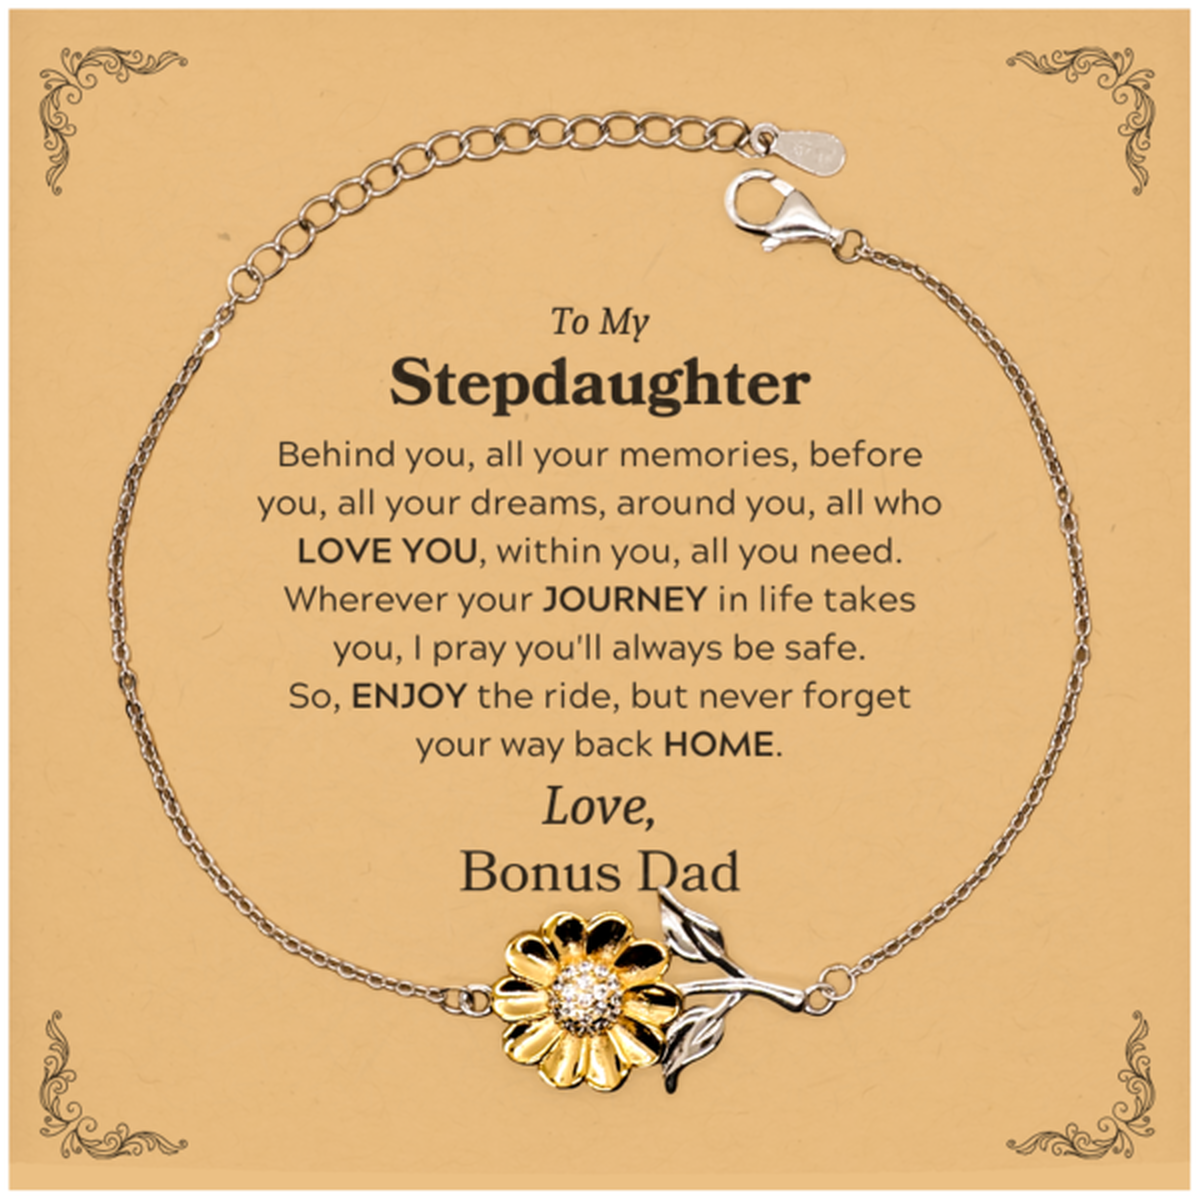 To My Stepdaughter Graduation Gifts from Bonus Dad, Stepdaughter Sunflower Bracelet Christmas Birthday Gifts for Stepdaughter Behind you, all your memories, before you, all your dreams. Love, Bonus Dad